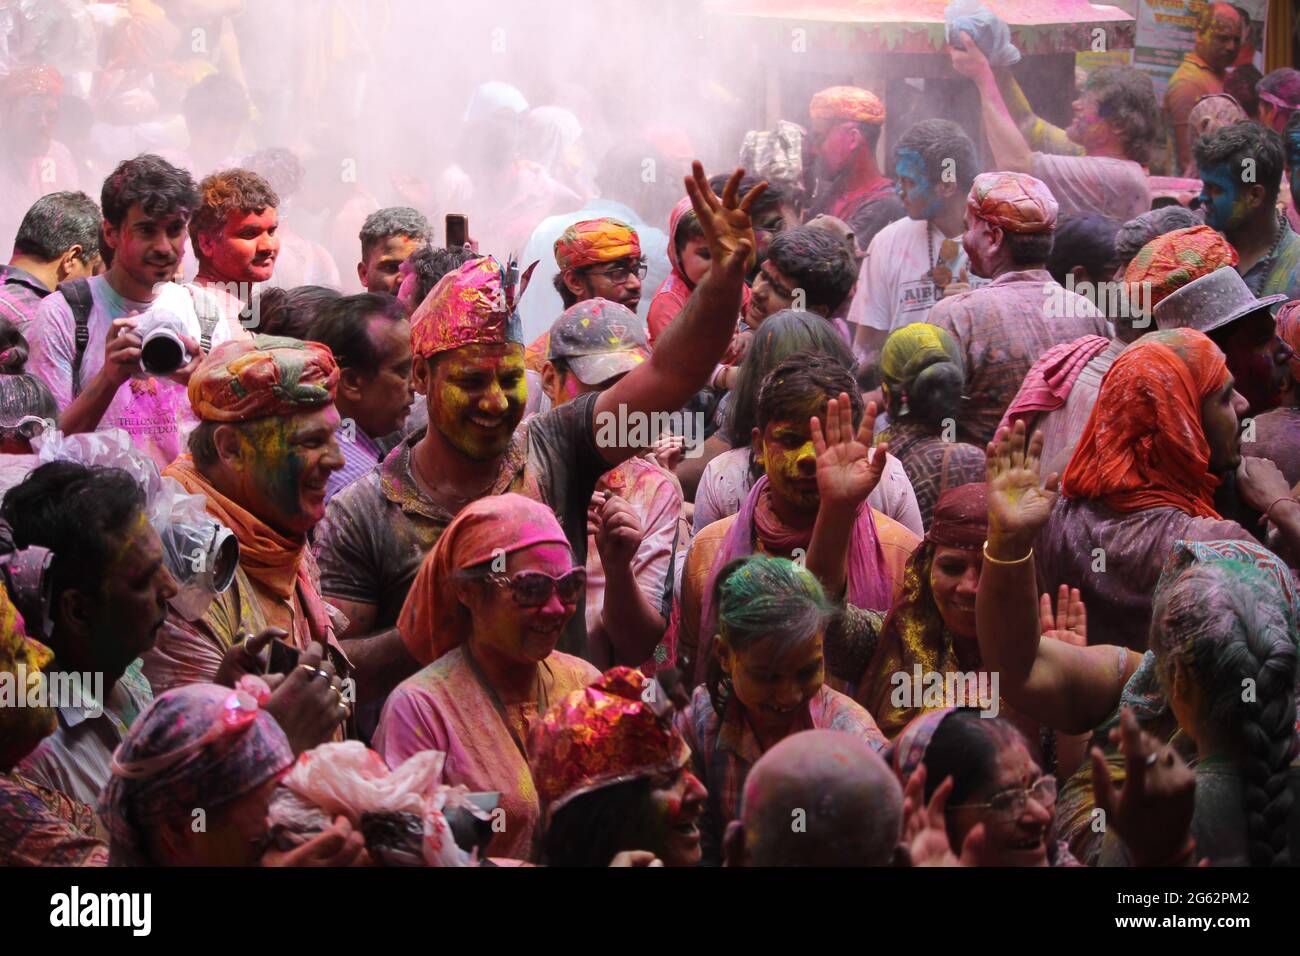 People celebrating the festival of colros - Holi in a temple at Dwarka, India. Stock Photo